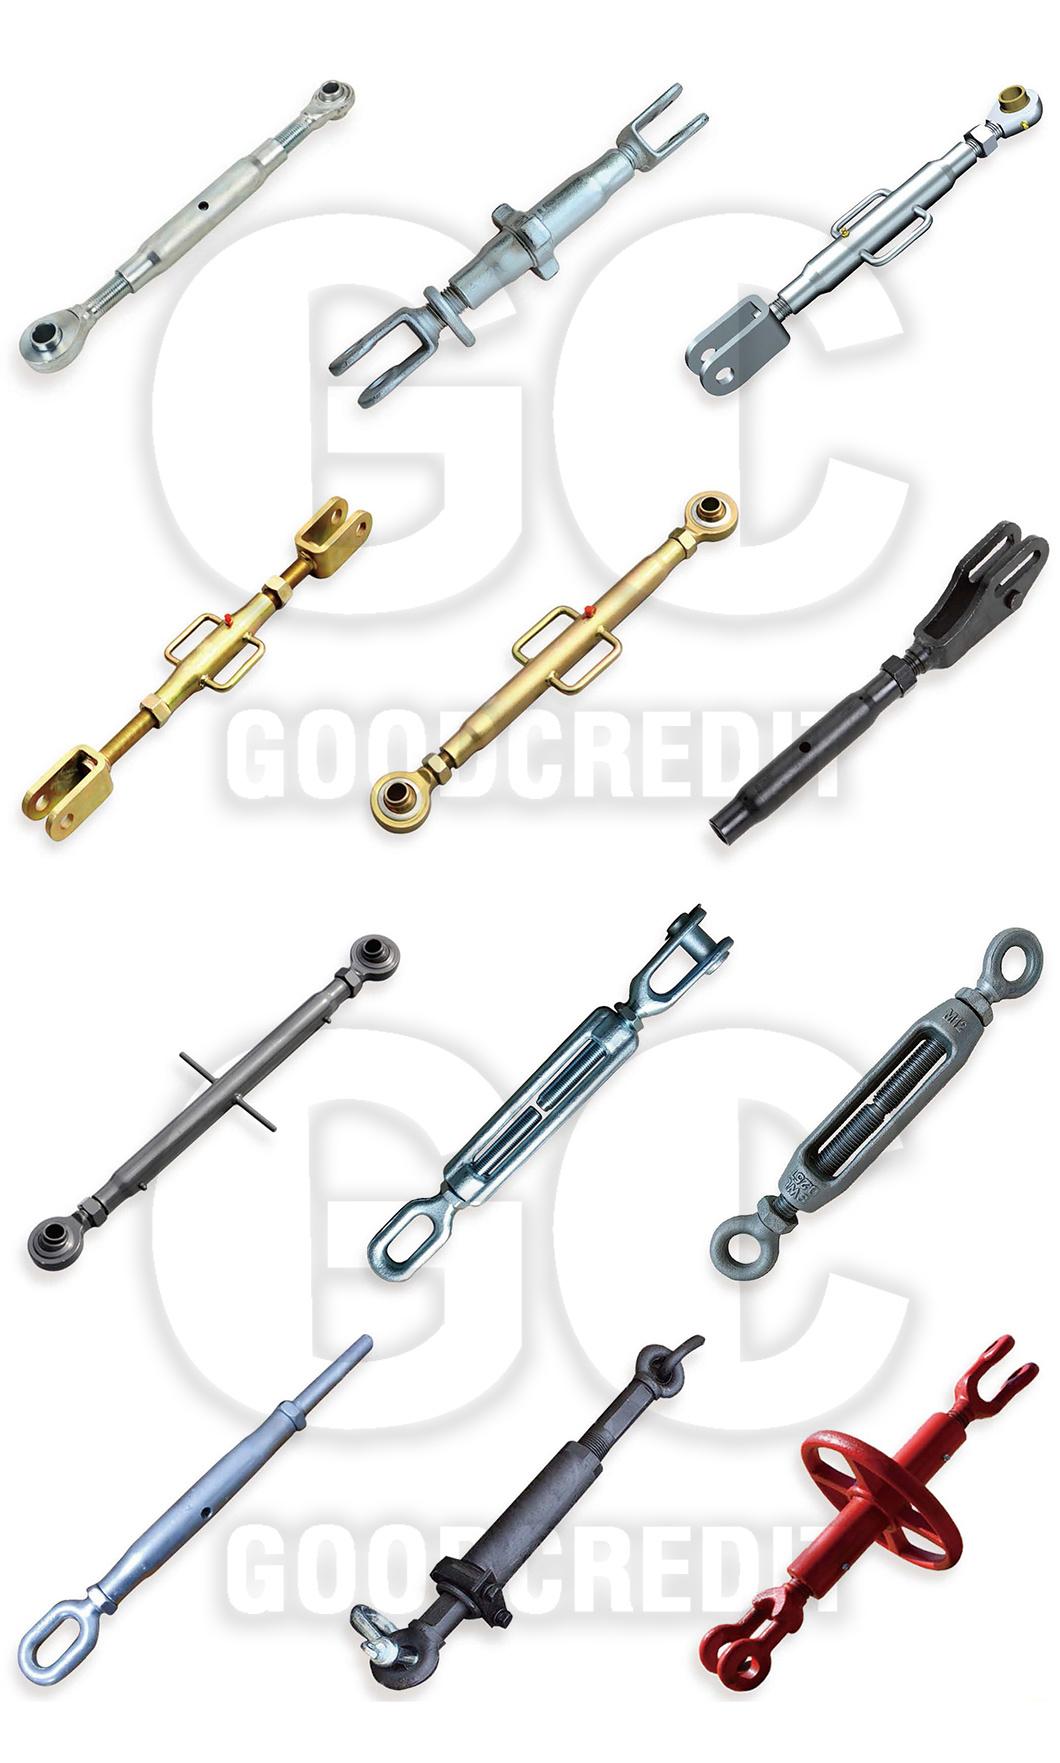 Us Type Forged Turnbuckle/Galvanized Drop Forged DIN1480 Commercial Malleable JIS Turnbuckle